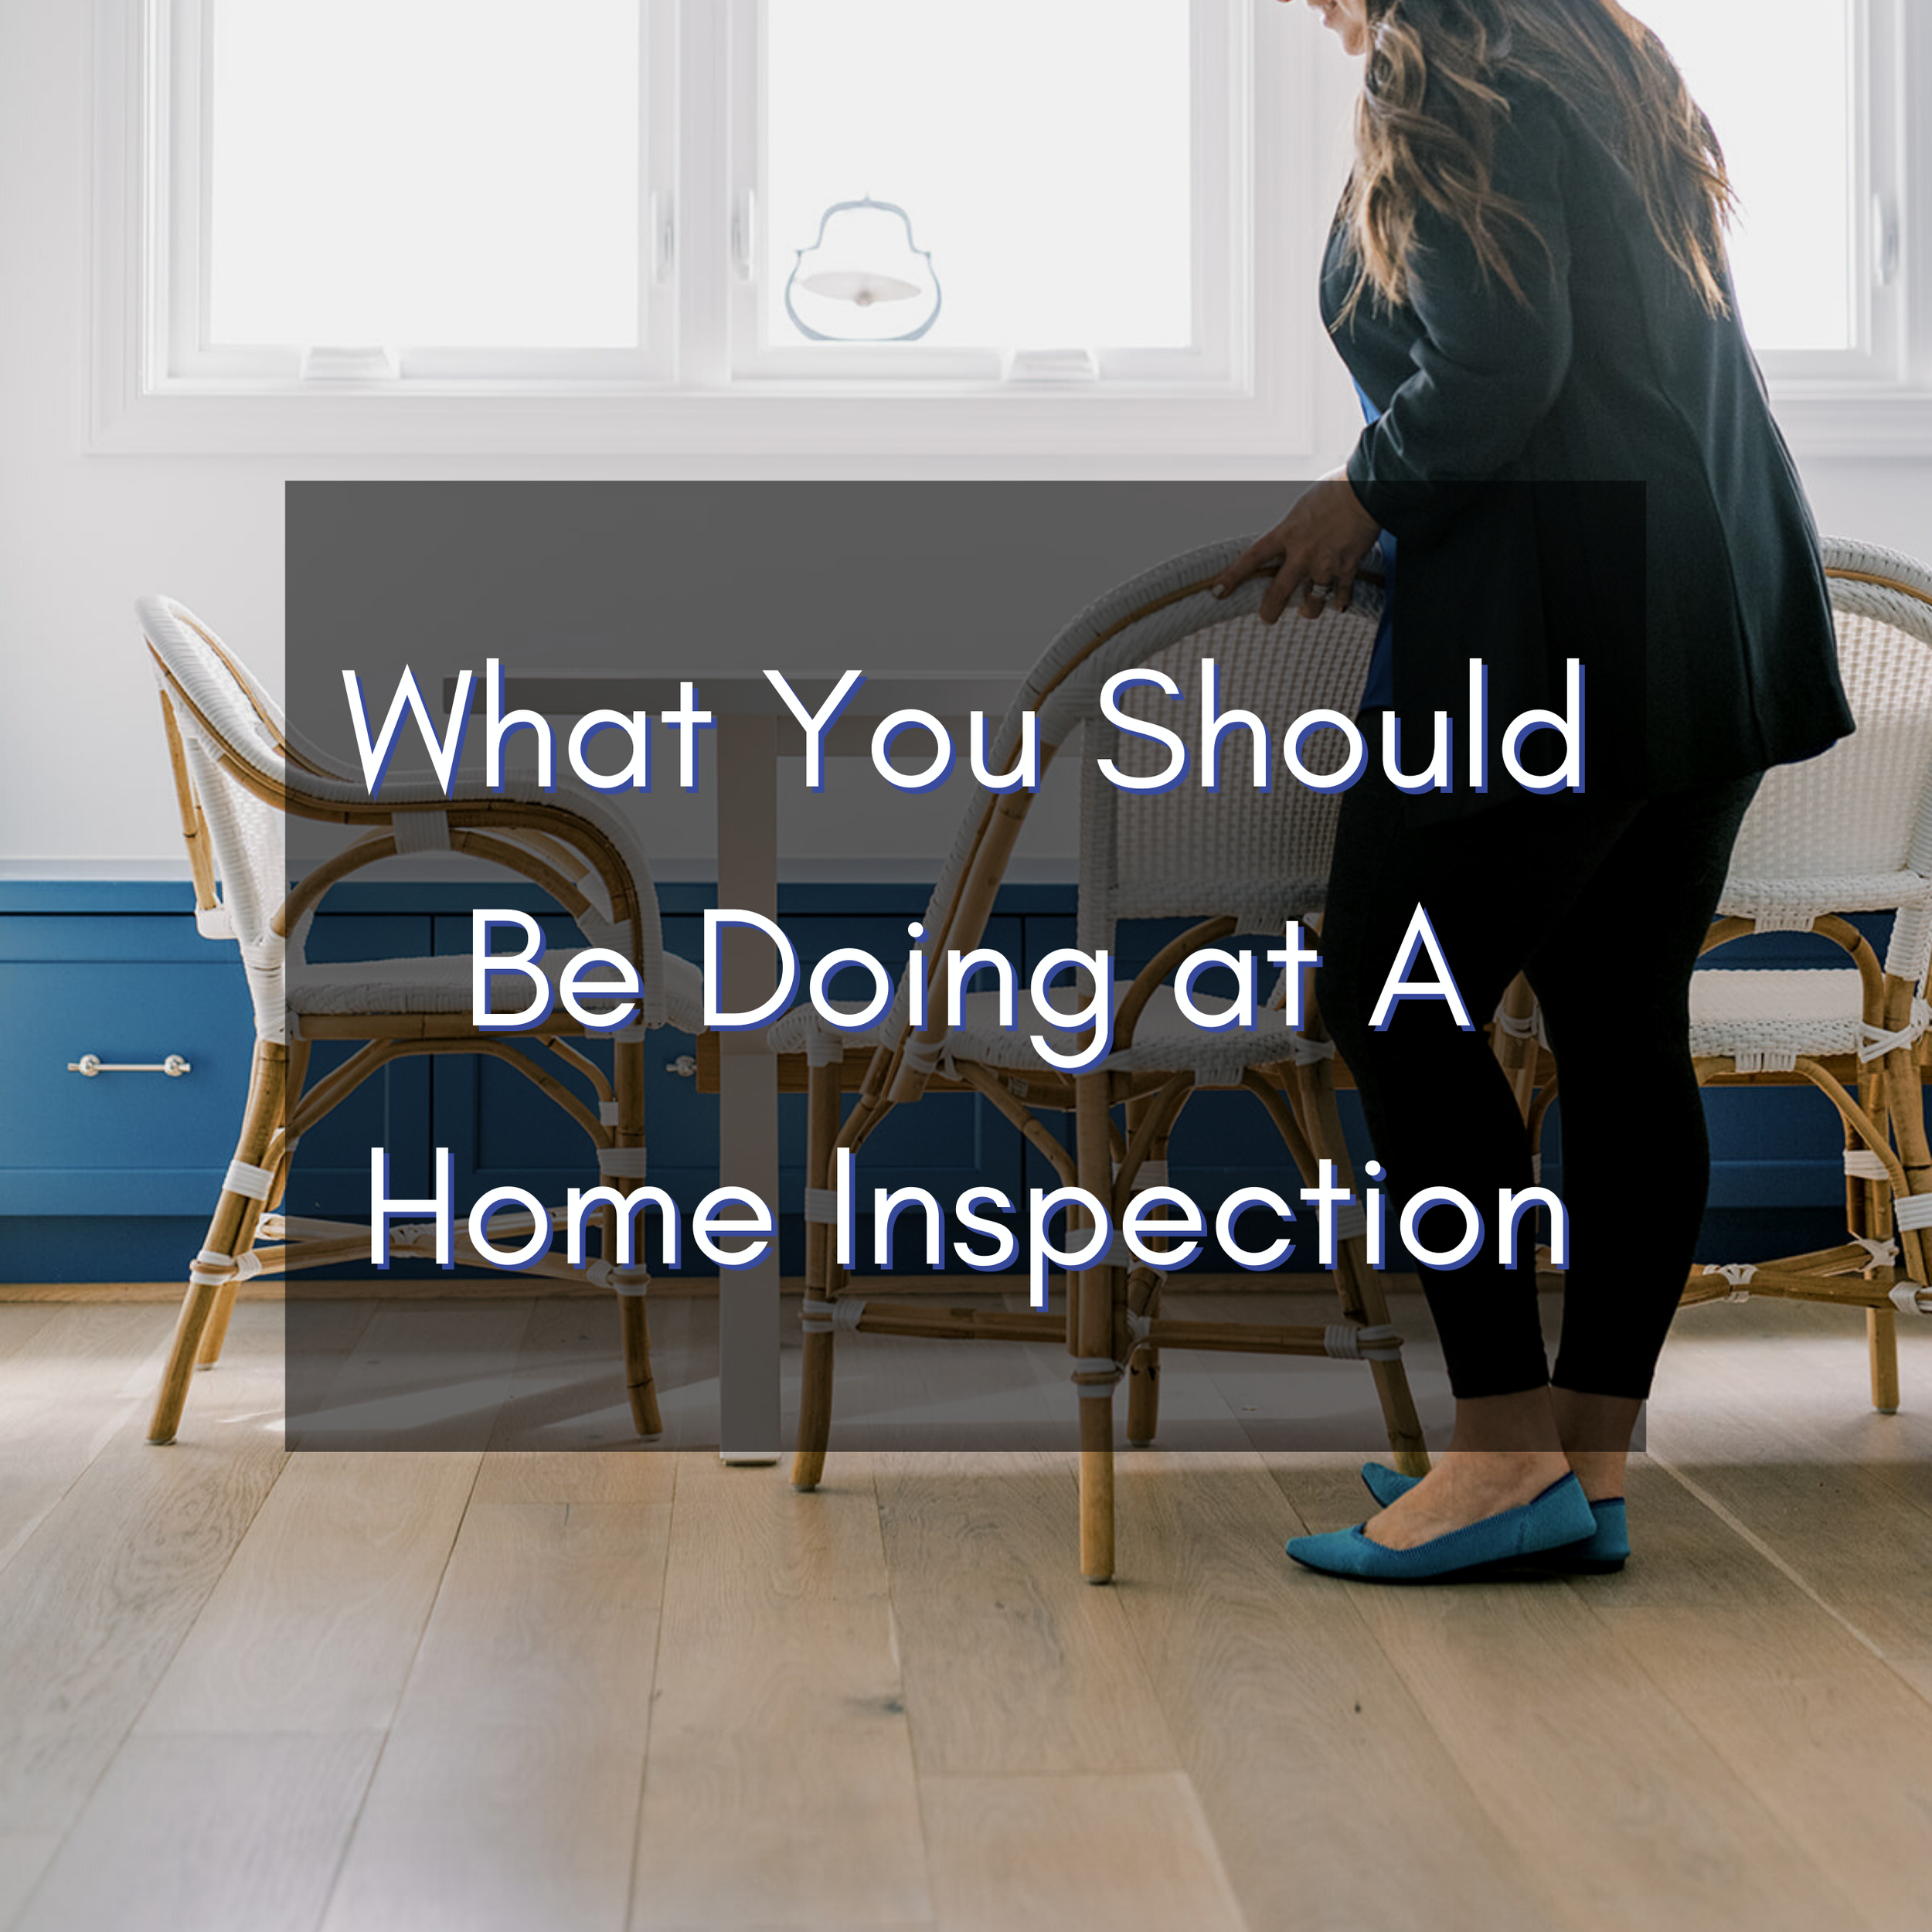 What You Should Be Doing at A Home Inspection